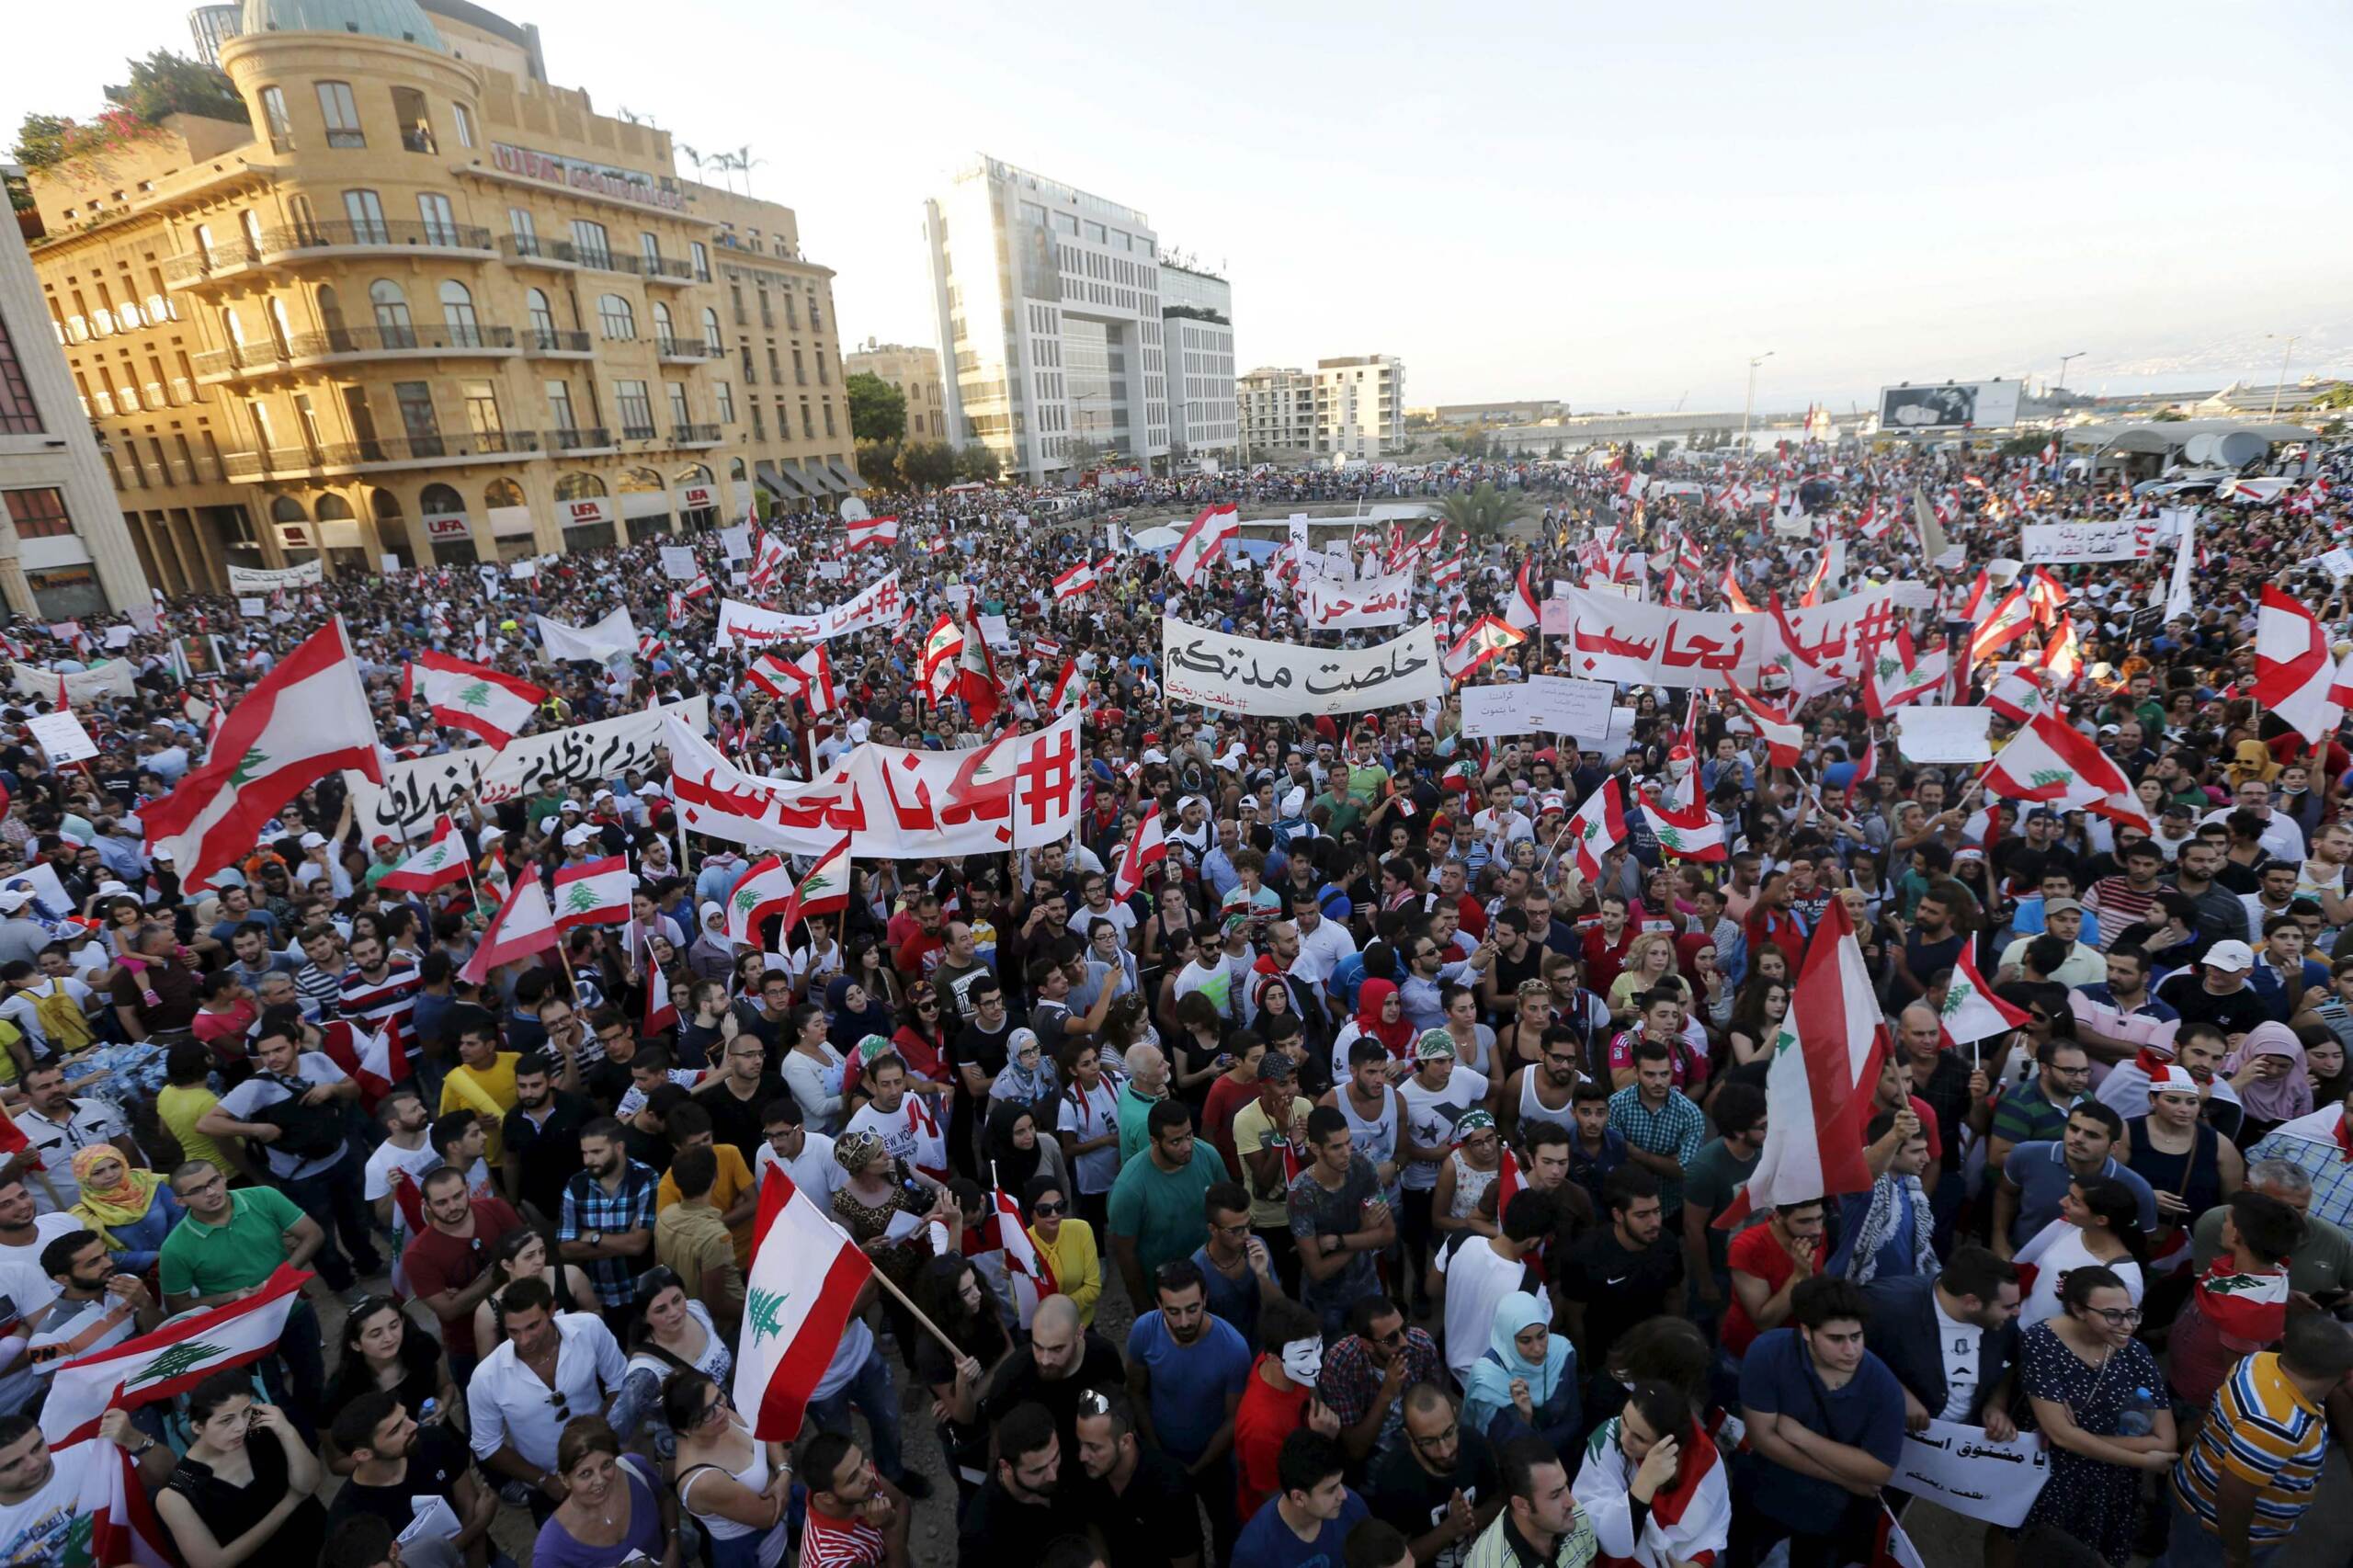 ifmat - Protesters in Beirut shout - No to Hezbollah